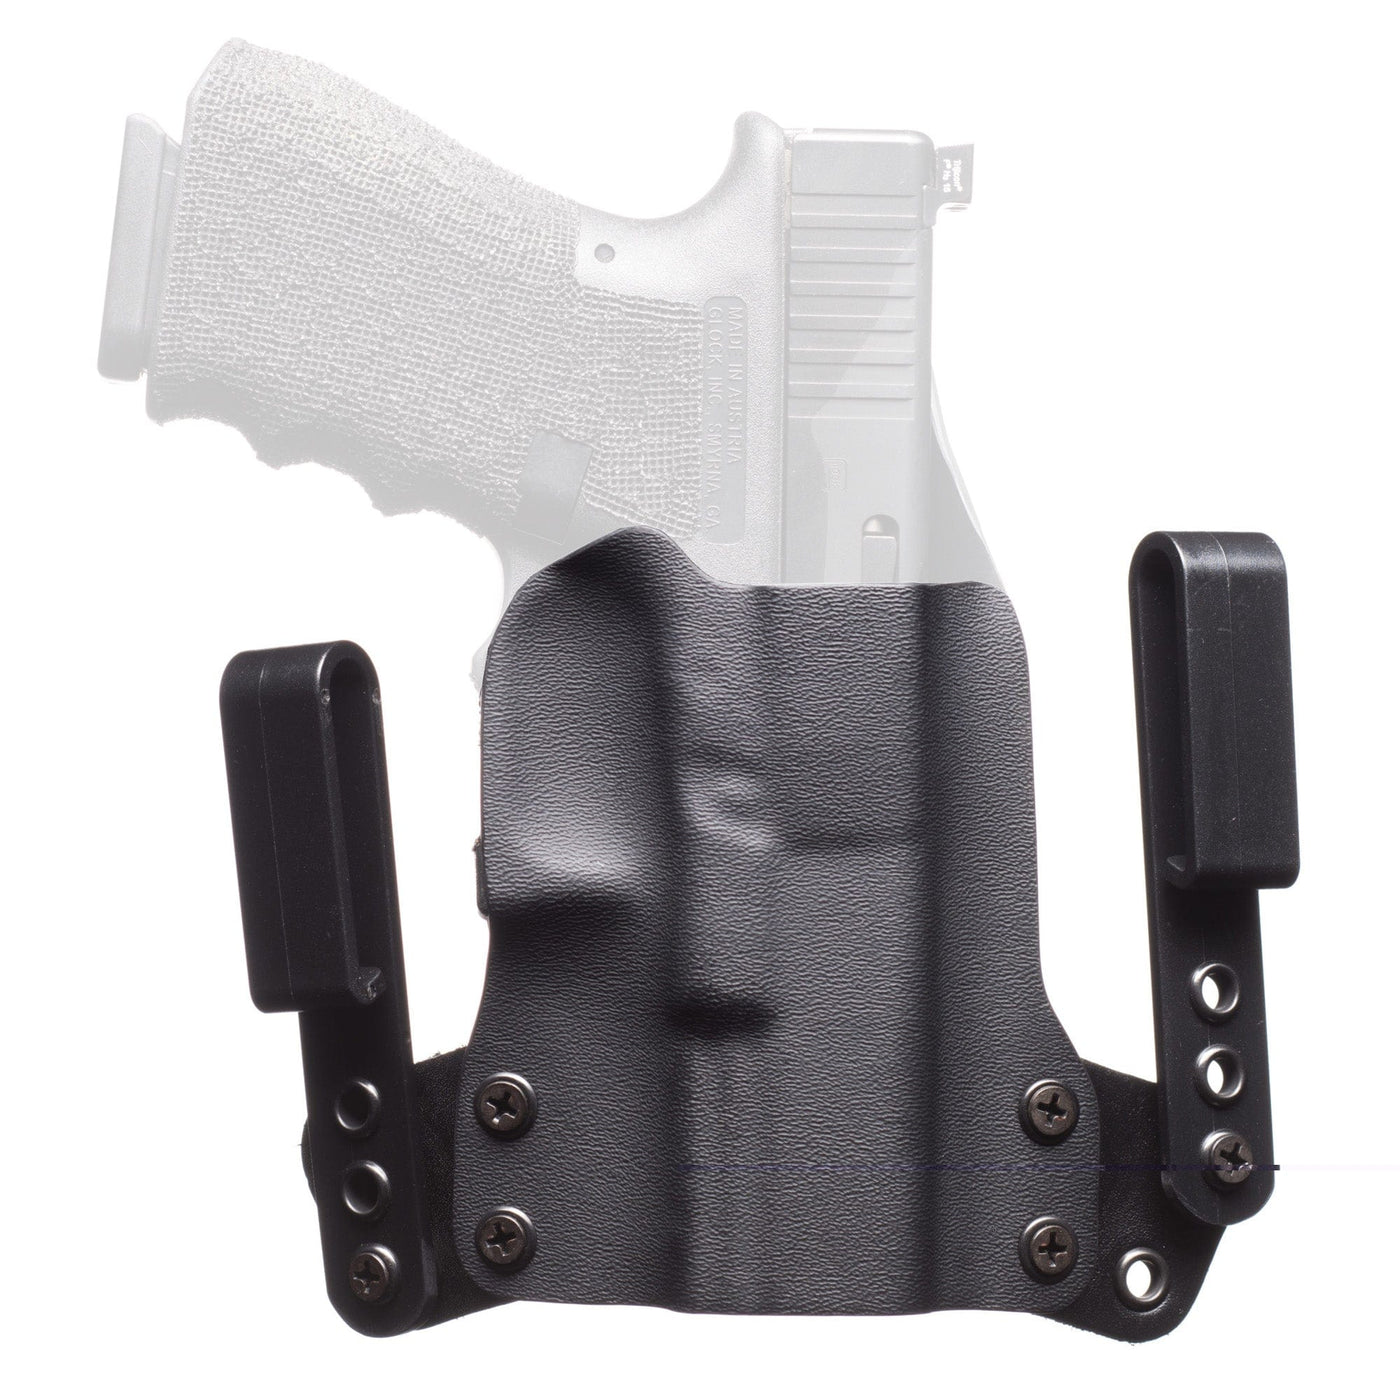 BlackPoint Tactical Blk Pnt Mini Wing Shield Plus Rh Blk Holsters